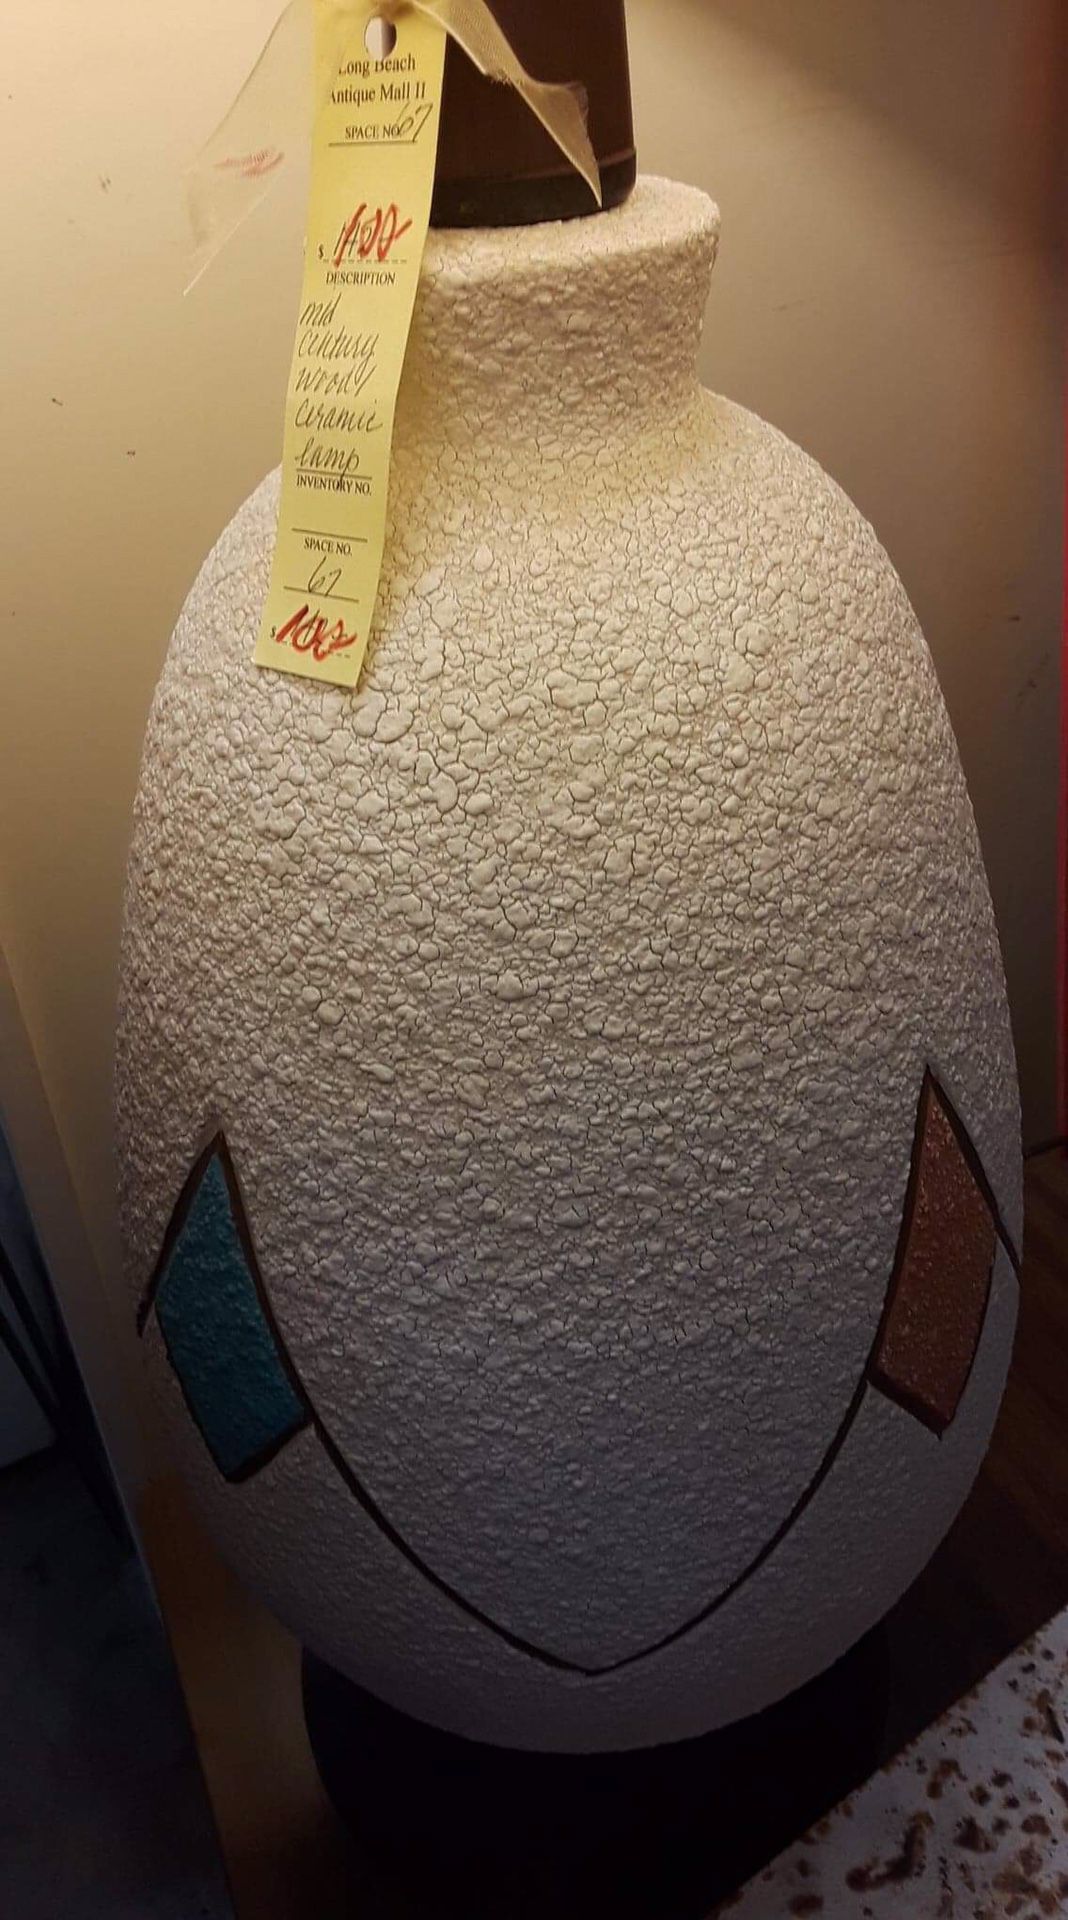 Vintage Mid Century wood/ceramic lamp with shade. Original price $145, sale price $100. Located at Long Beach Antique Mall 2, Signal Hill, Ca